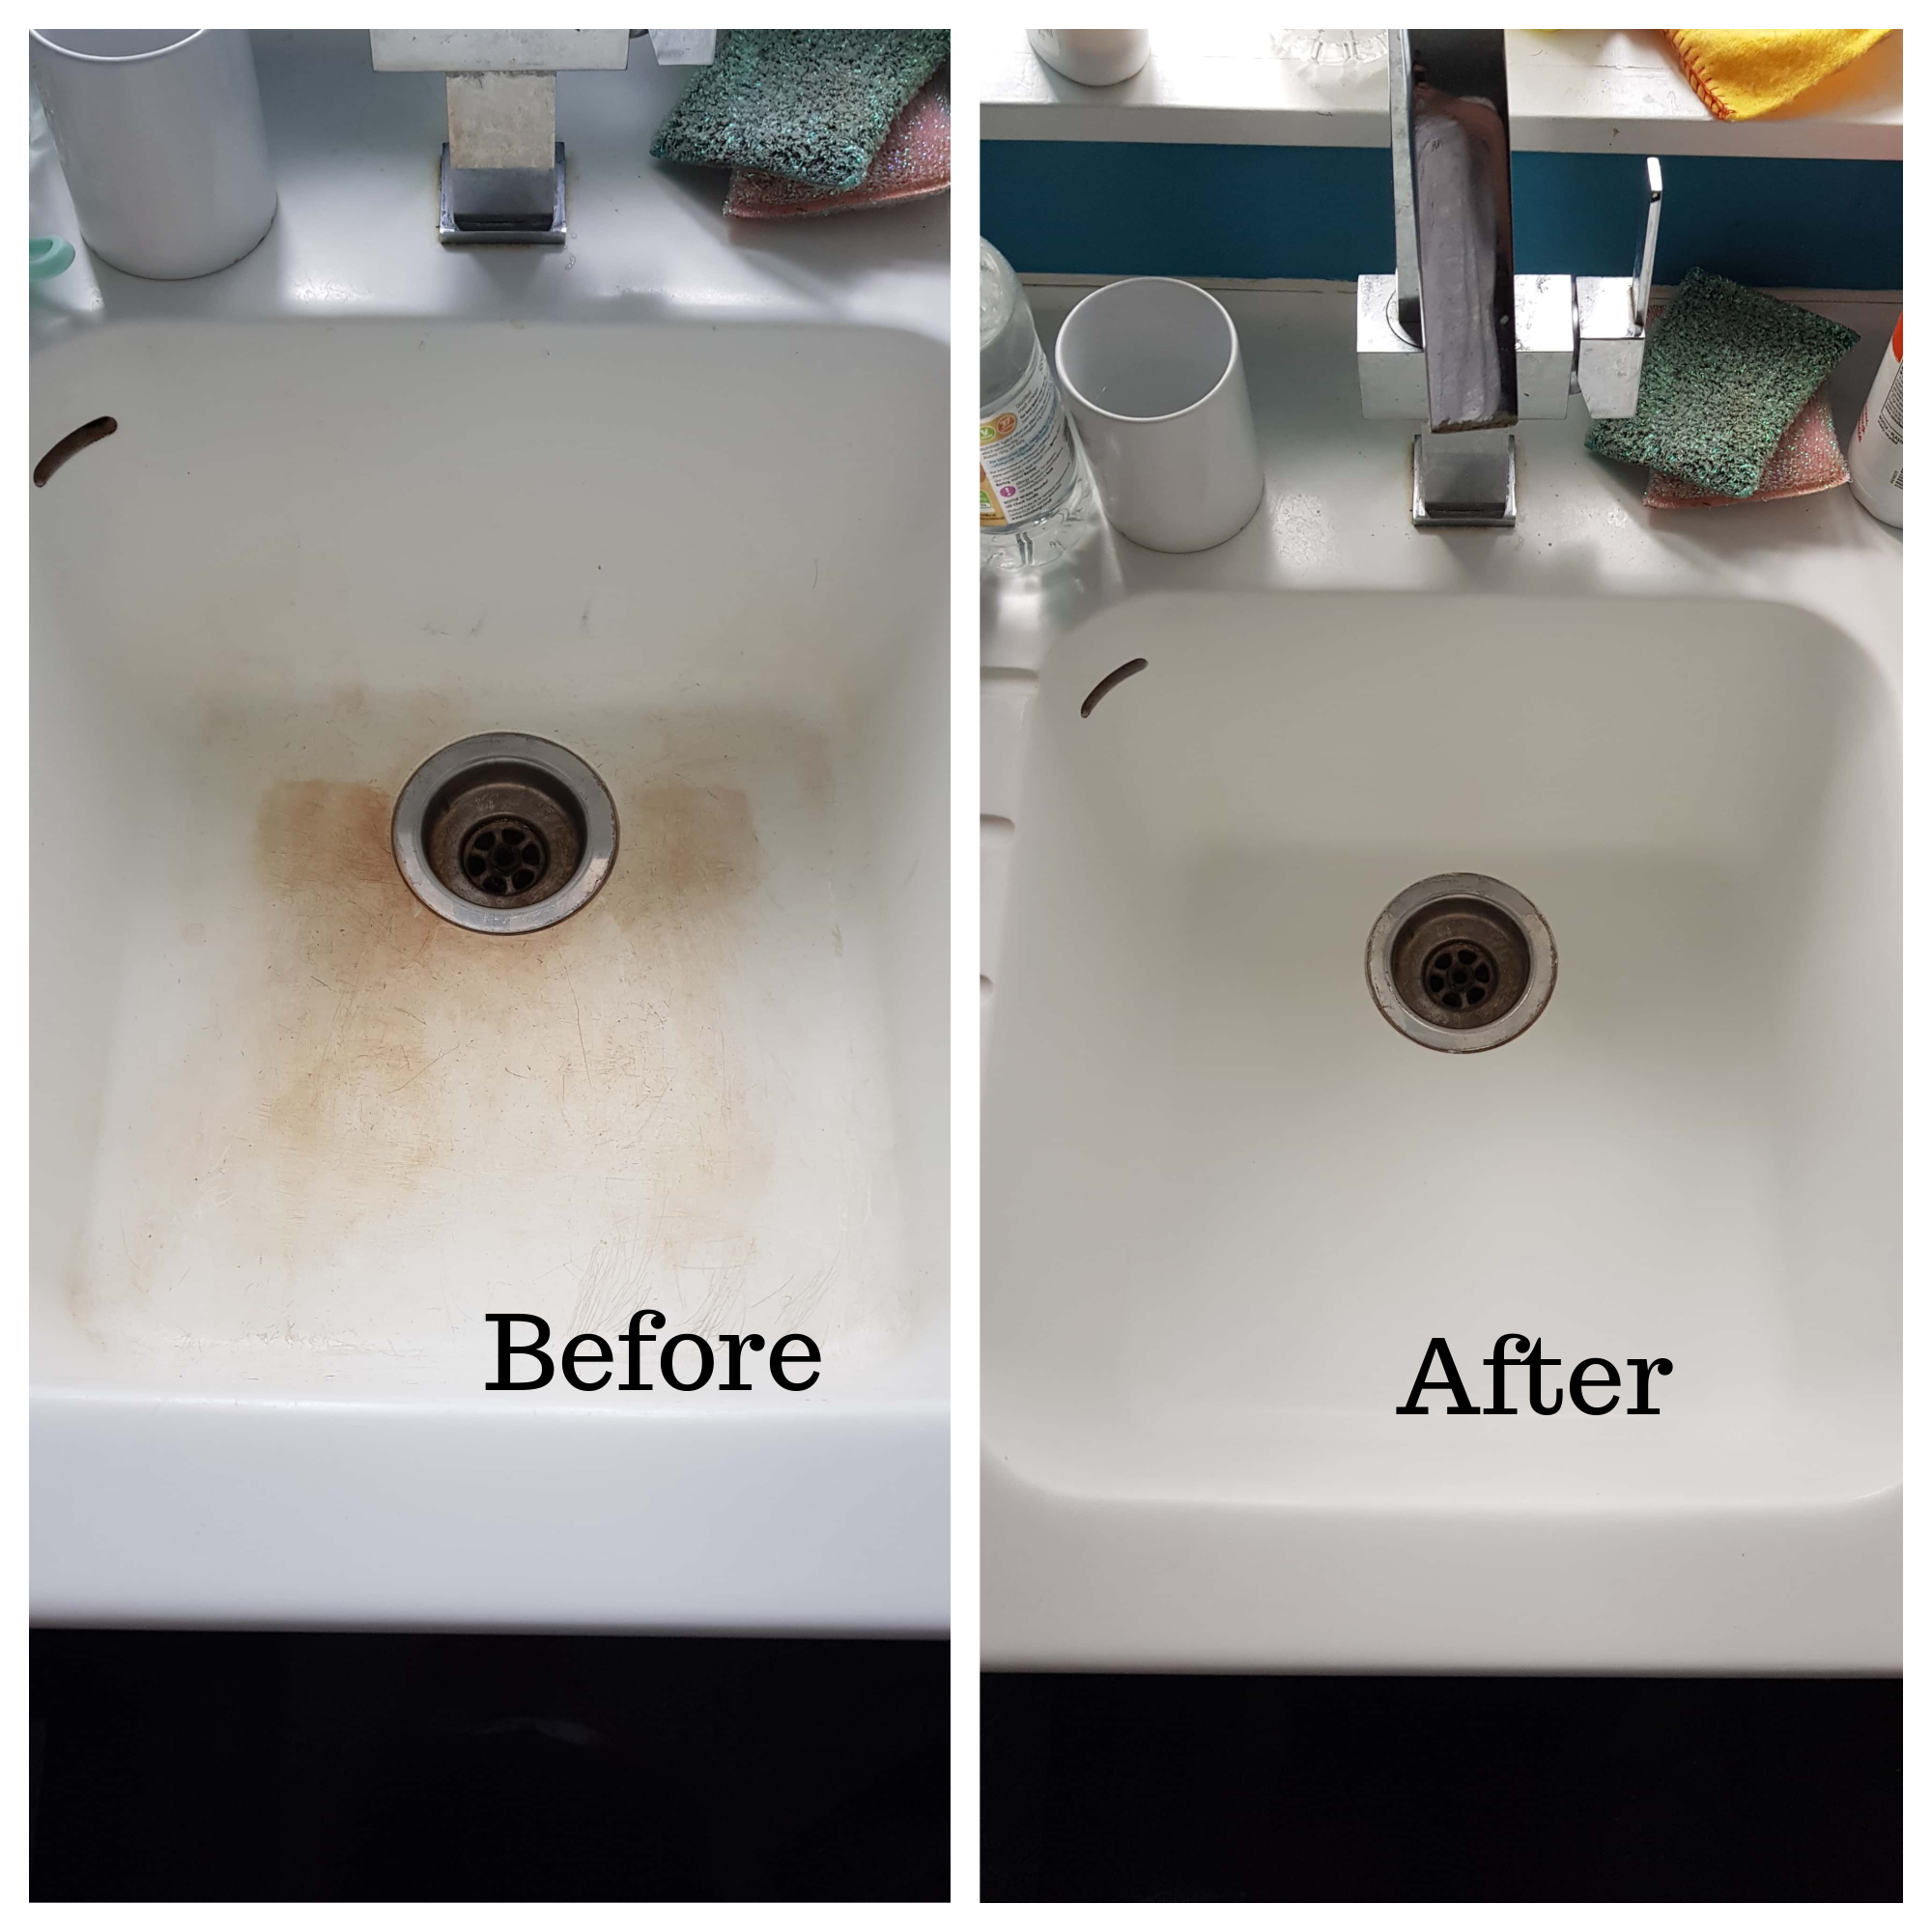 Corian Worktop Stains Removed In London, How To Repair Corian Countertop Scratches